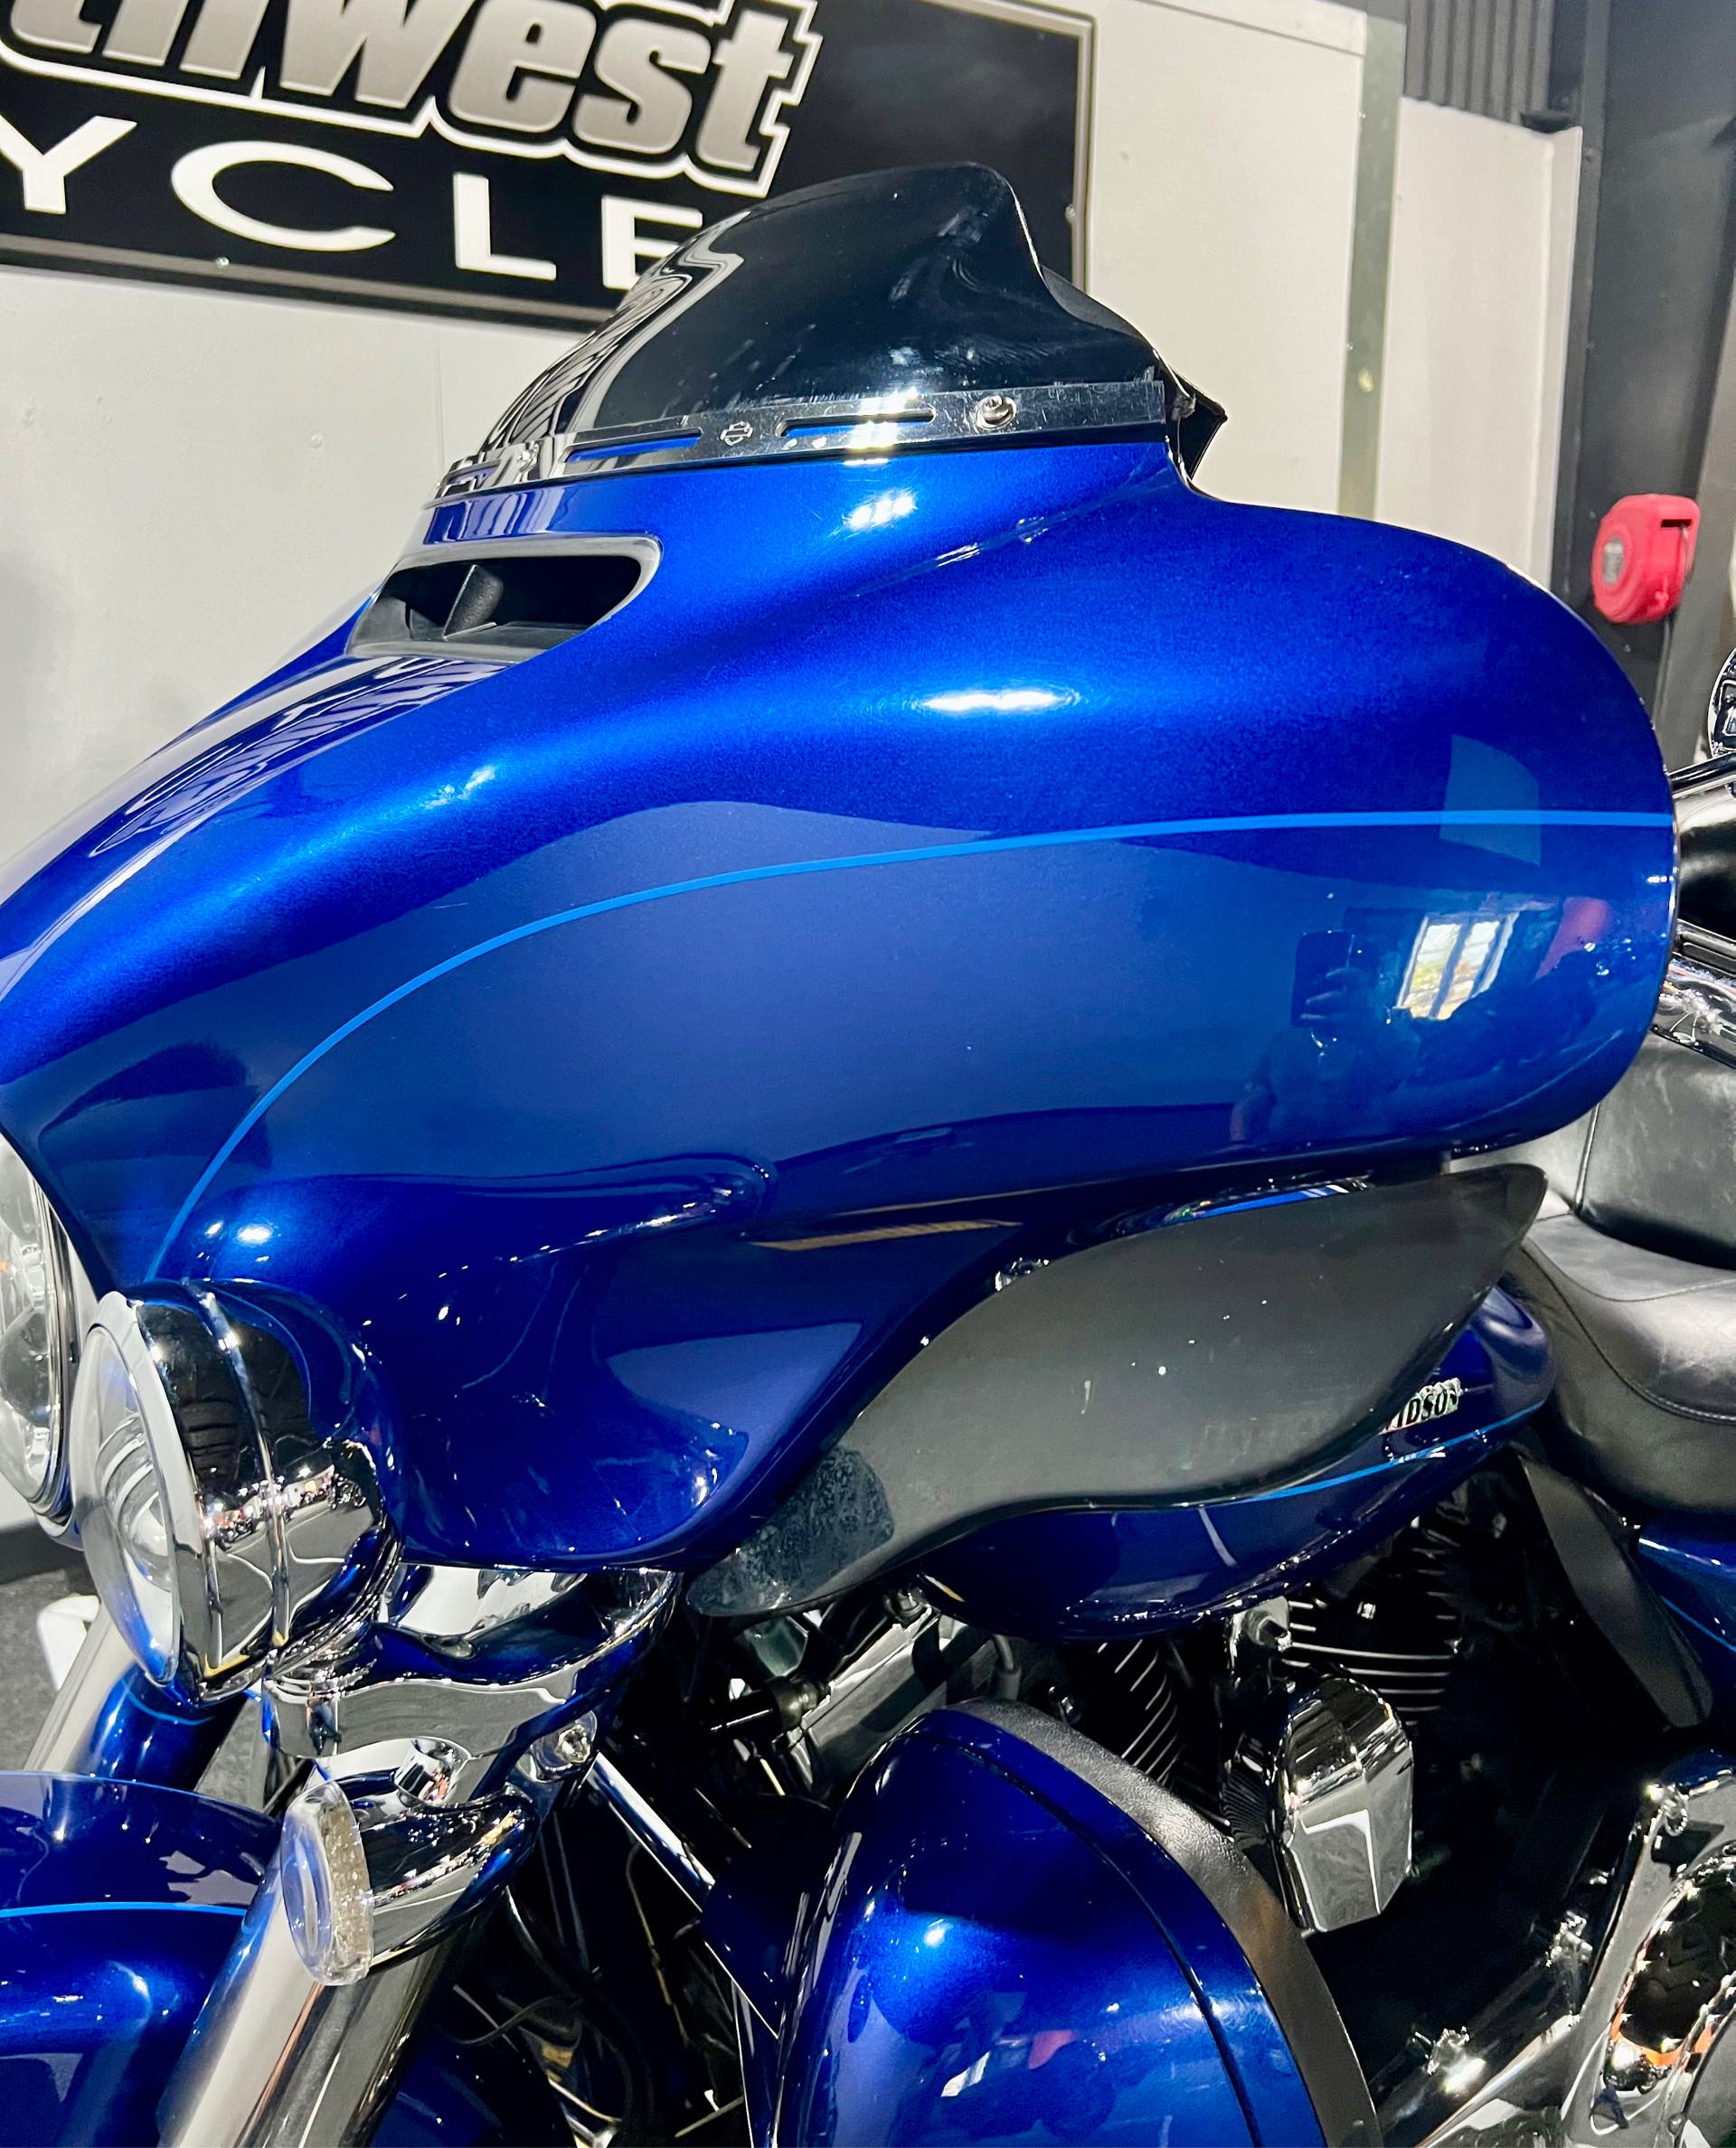 2015 Harley-Davidson Electra Glide Ultra Limited Low at Southwest Cycle, Cape Coral, FL 33909